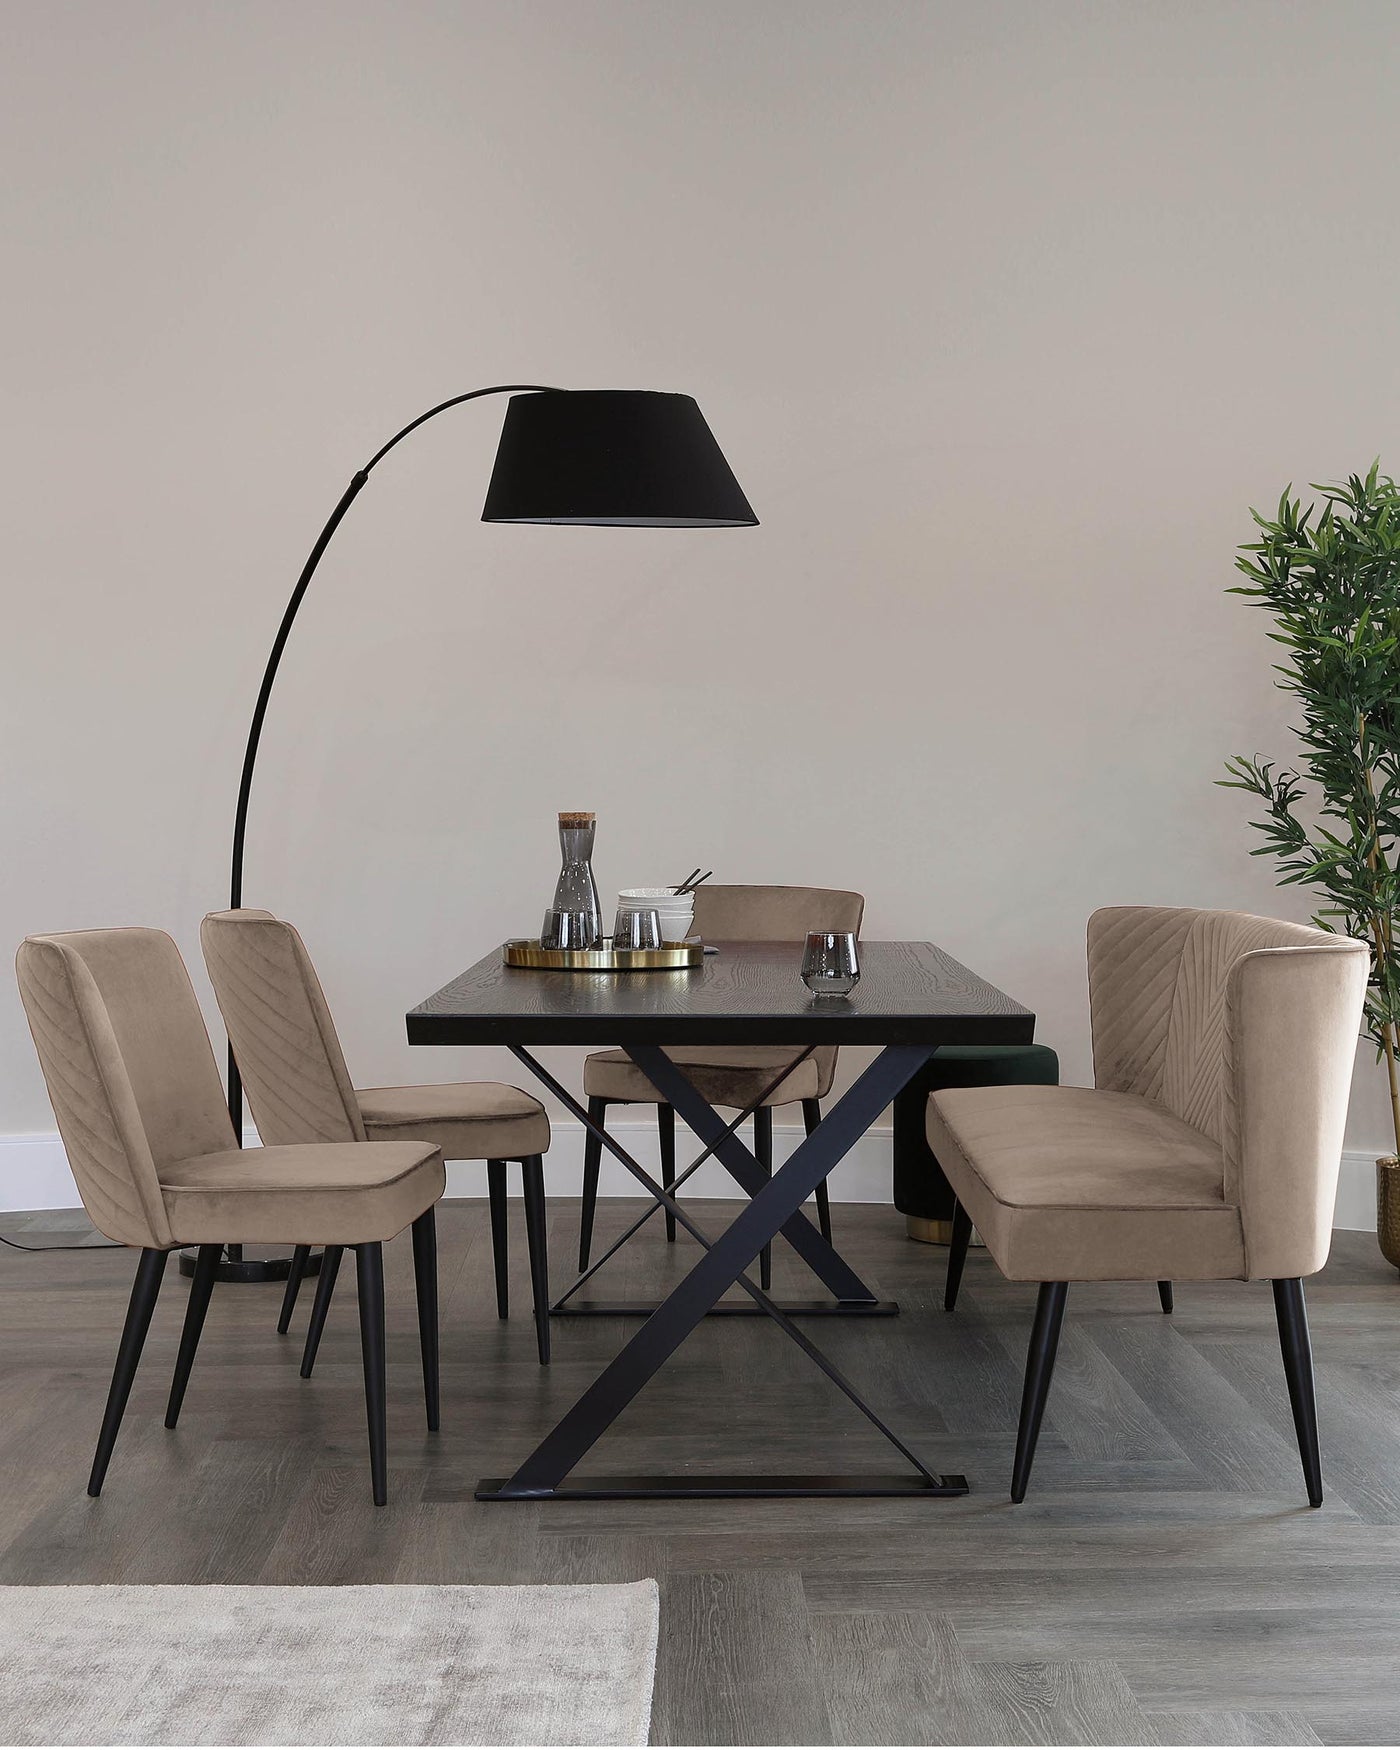 Contemporary dining room featuring a rectangular dark tabletop with unique X-shaped metallic legs, accompanied by two upholstered chairs with vertical stitch detailing and black splayed legs, and complemented by a sleek, overhanging floor lamp with an arched design and a large black shade.